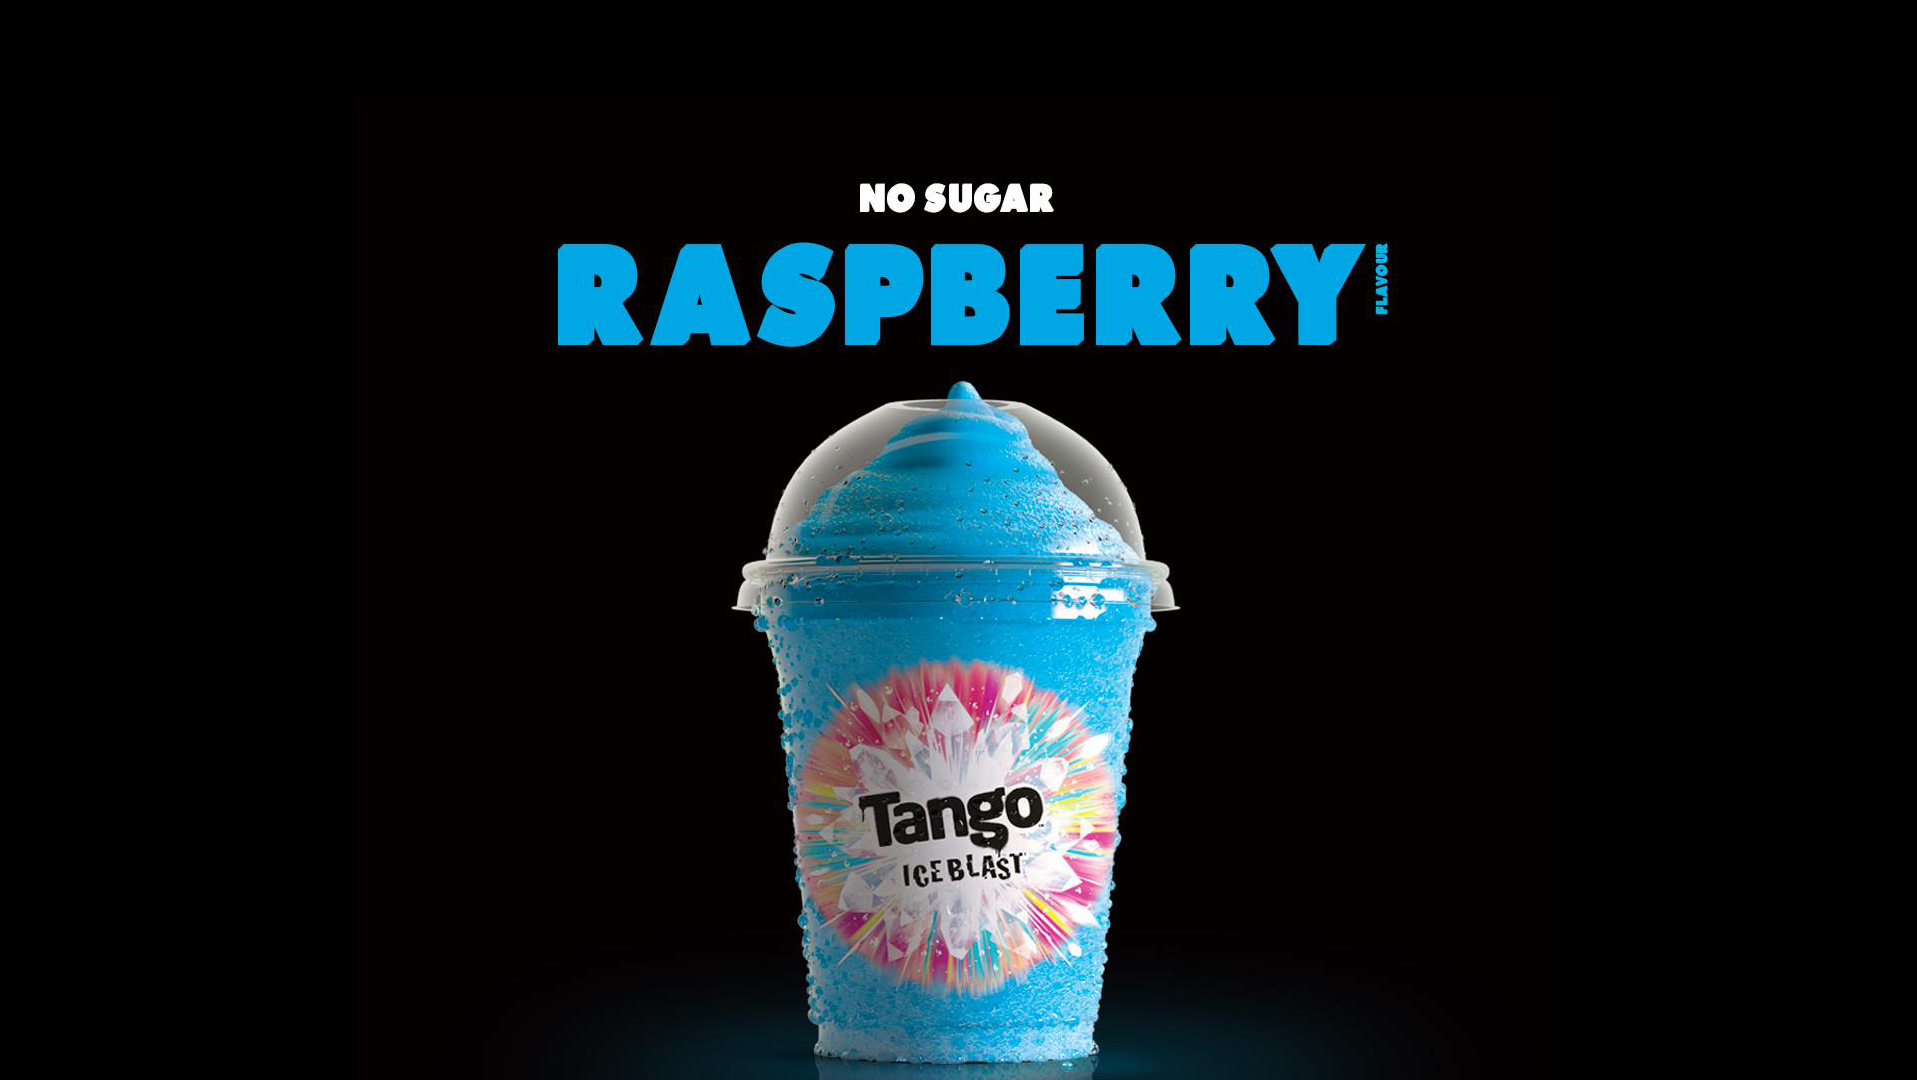 21oz Raspberry Tango Ice Blast - Fried Chicken Delivery in Maryland E20